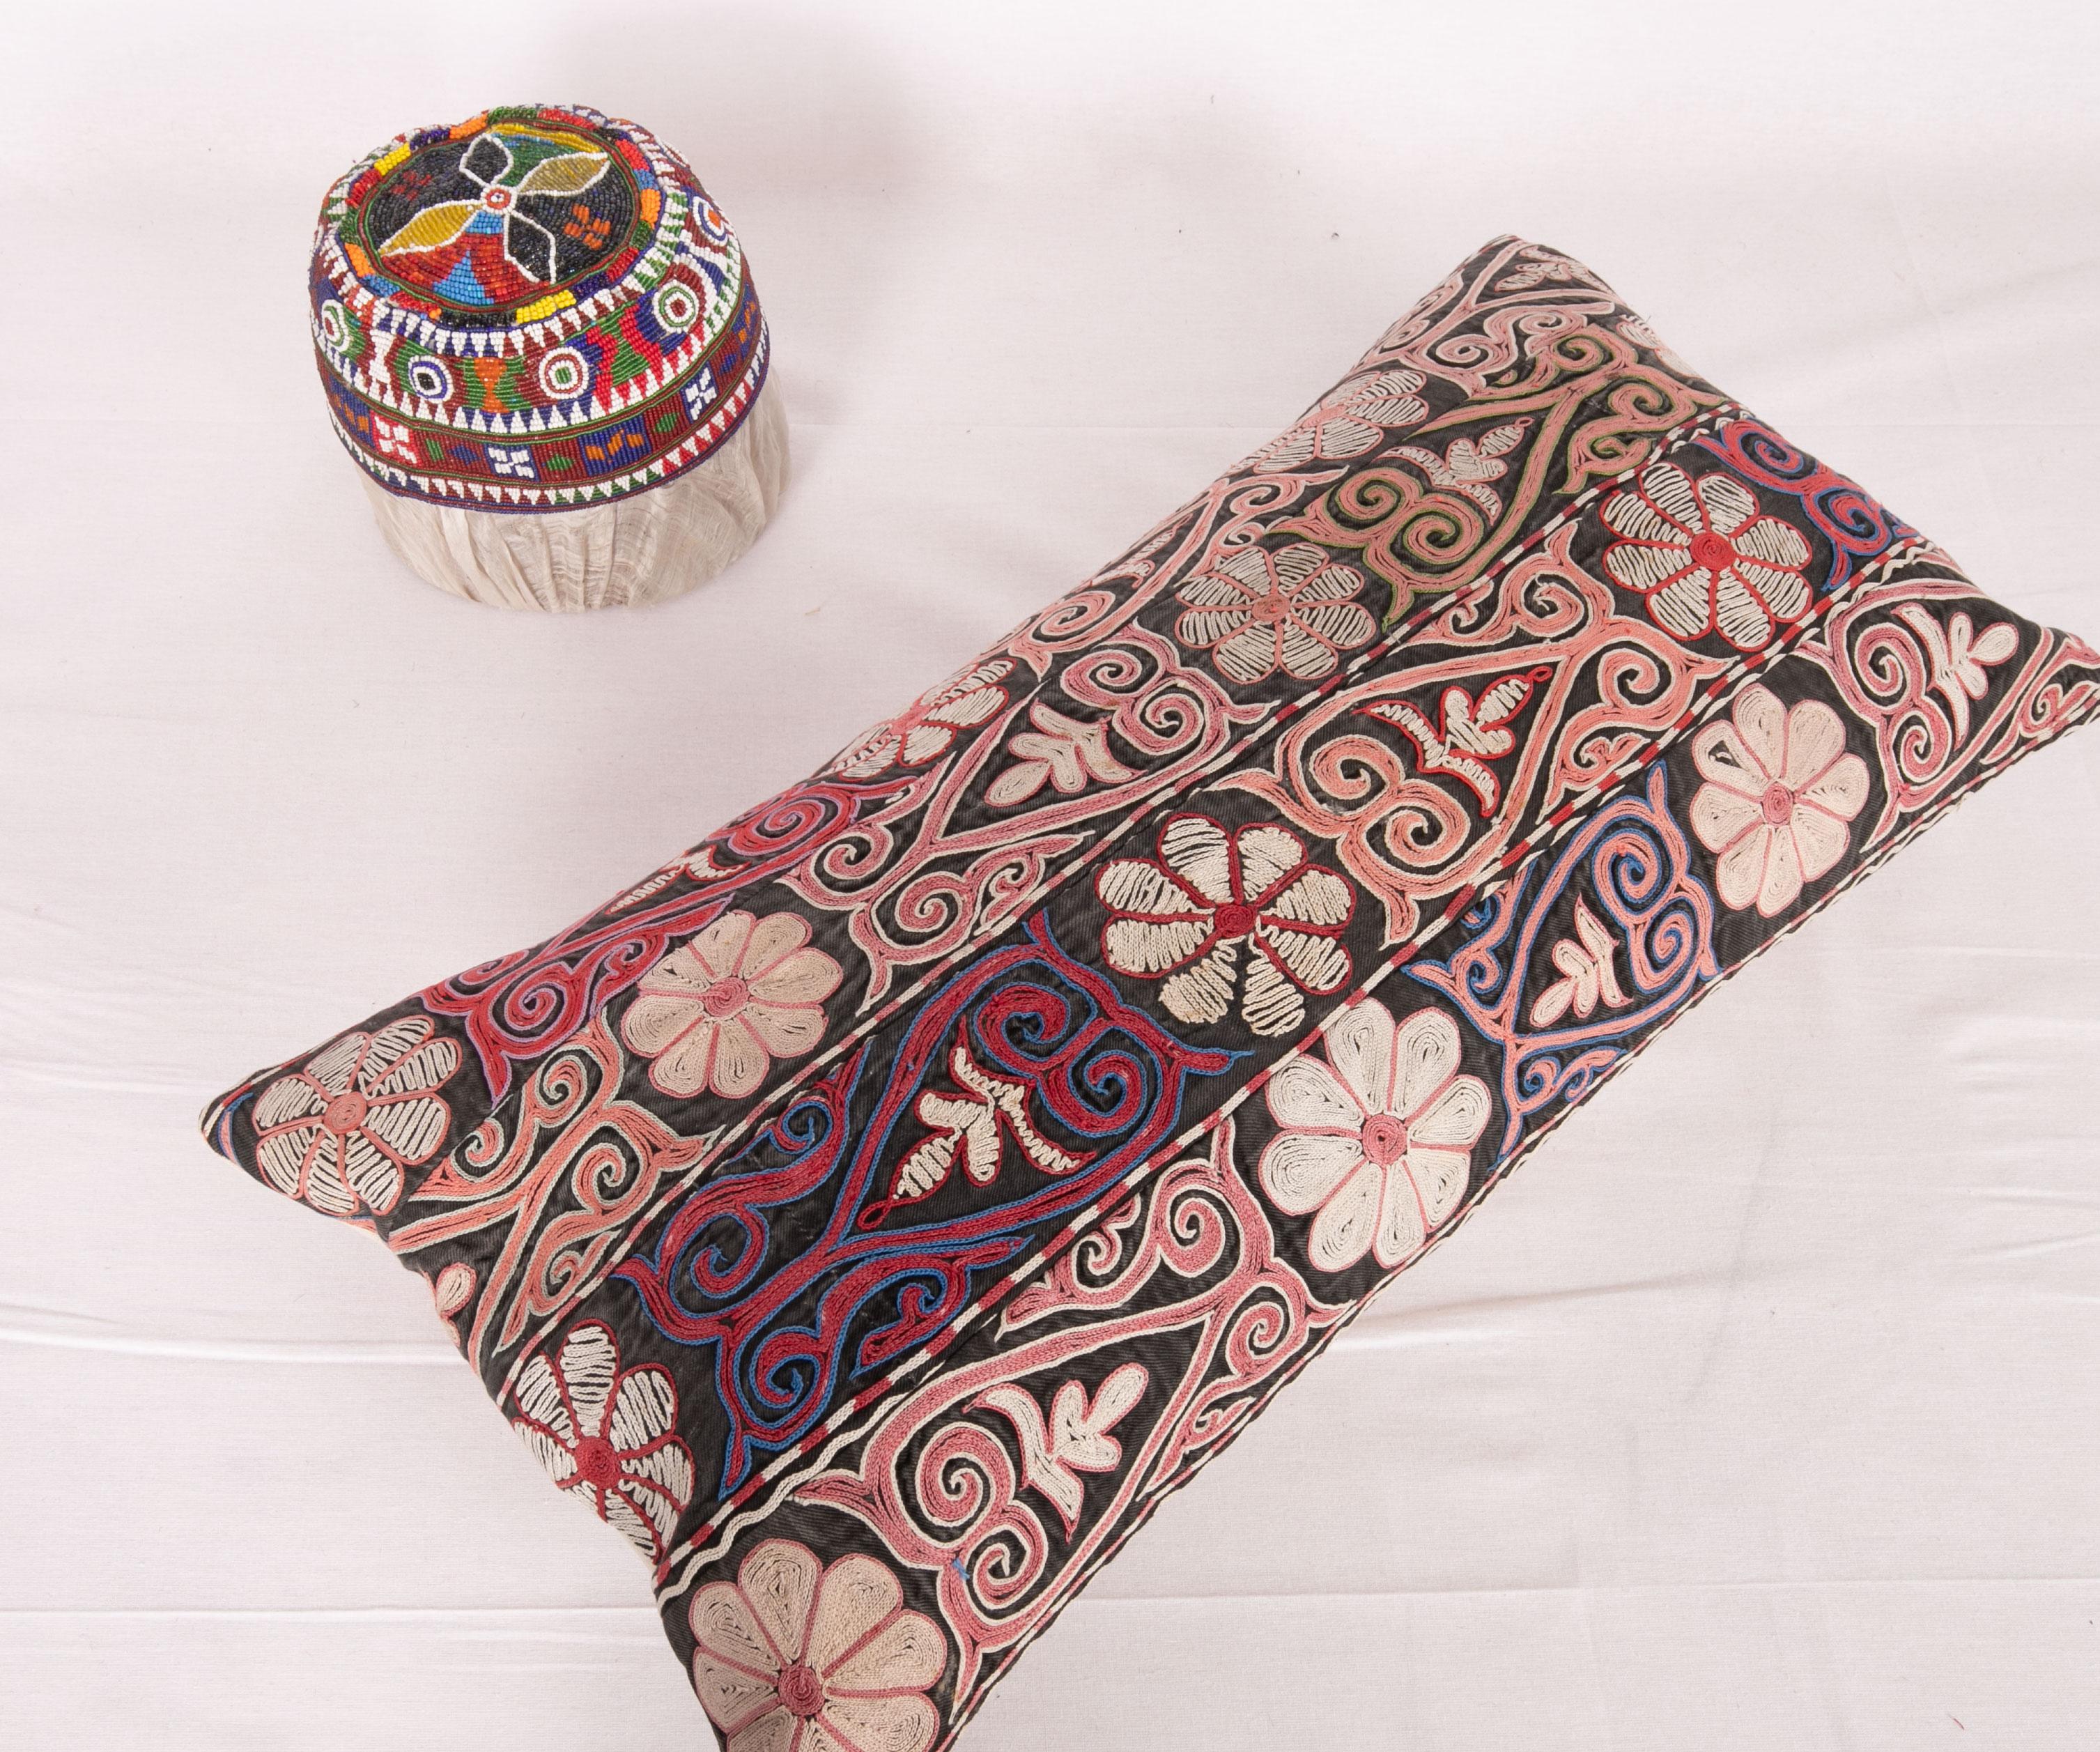 Cotton Pillow Case Made from the Borders of a Kyrgyz / Kazak Embroidery